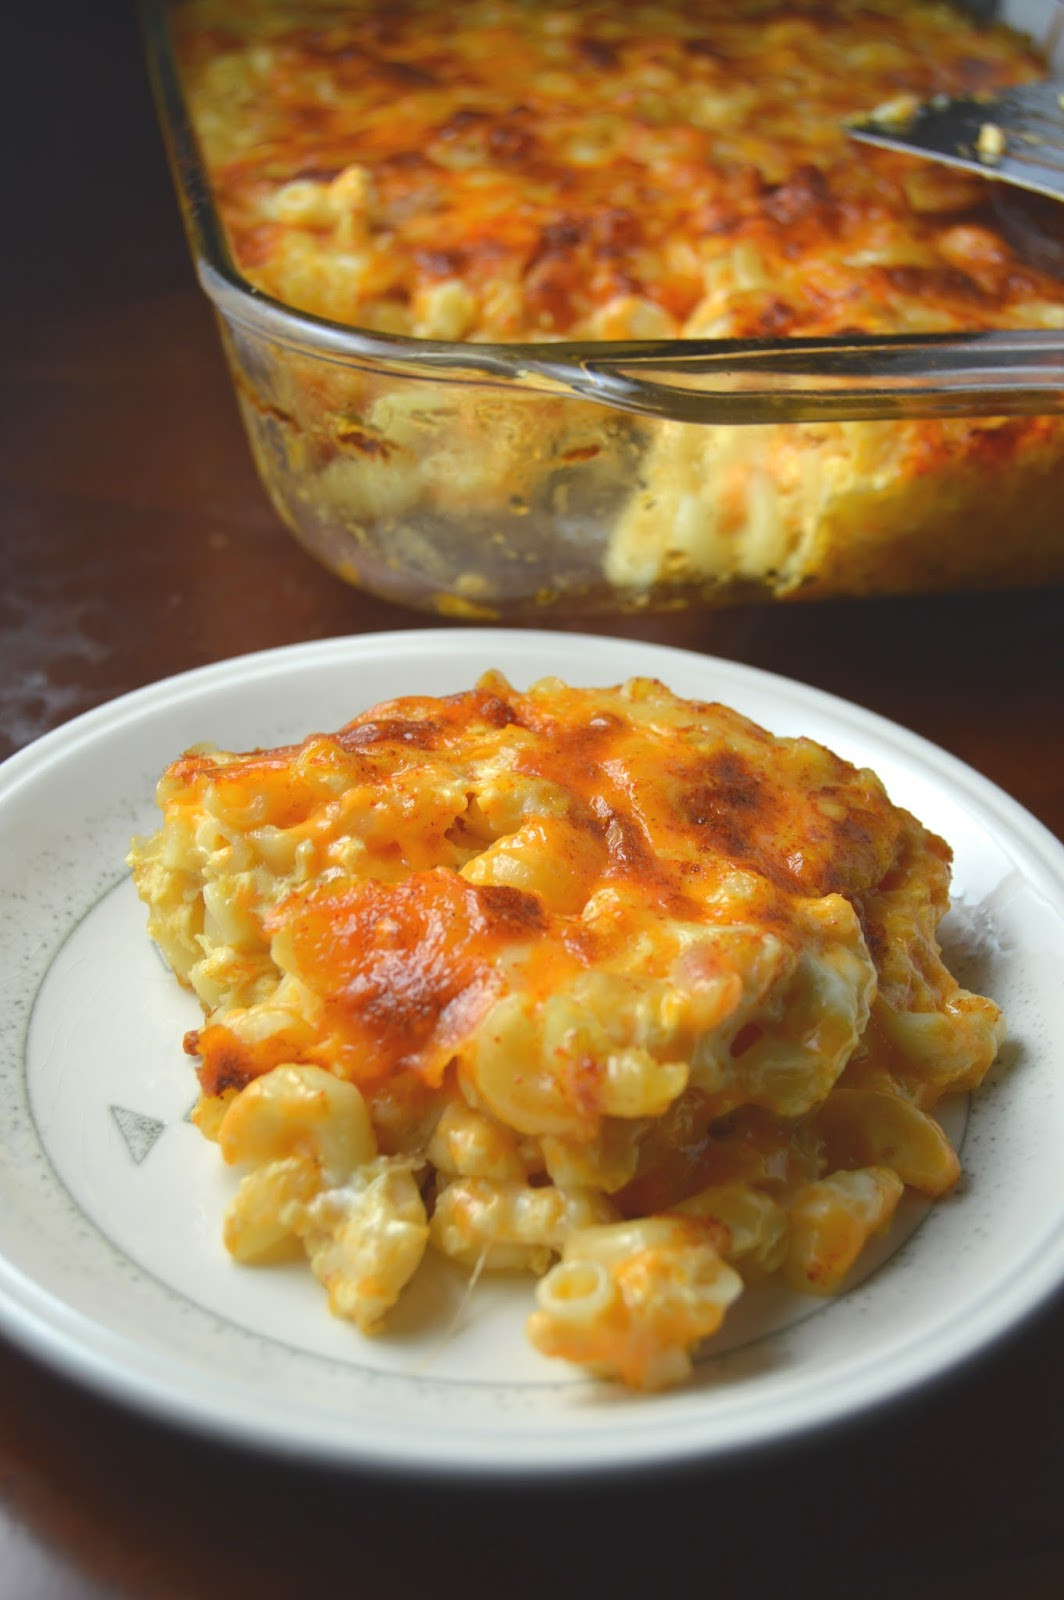 Best Baked Macaroni And Cheese Recipes
 Baked Macaroni and Cheese